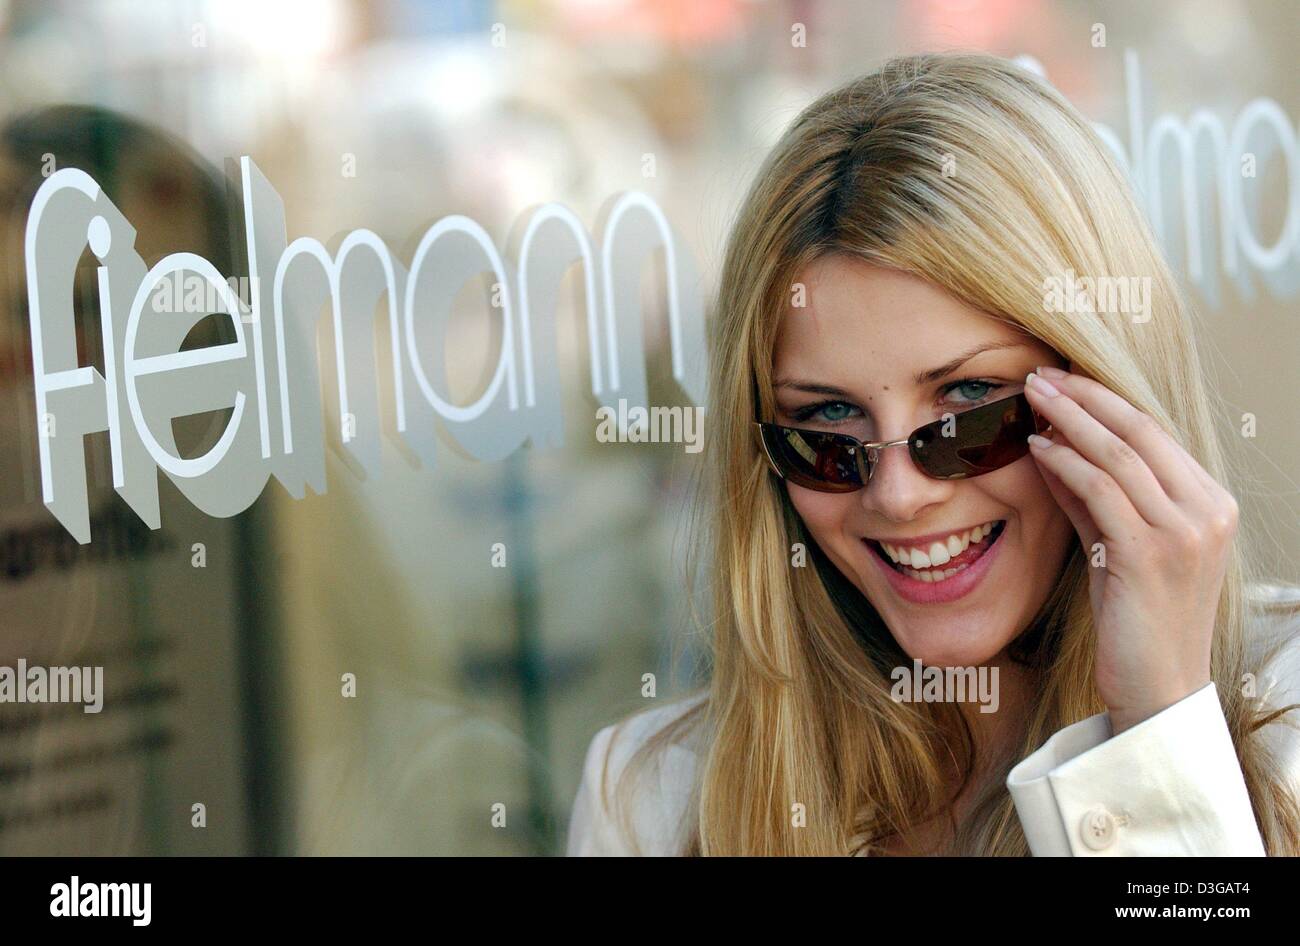 (dpa) - Model Theresa smiles as she presents a pair of sunglasses by Fielmann AG in Hamburg, Germany, 28 April 2004. Fielmann AG achieved pre-rax earnings of 112 million euros in the 2003 business year which marks an increase by 78 percent. The company, which is already covering a large market share in Germany, is now aiming to expand its business activities in Europe. Stock Photo